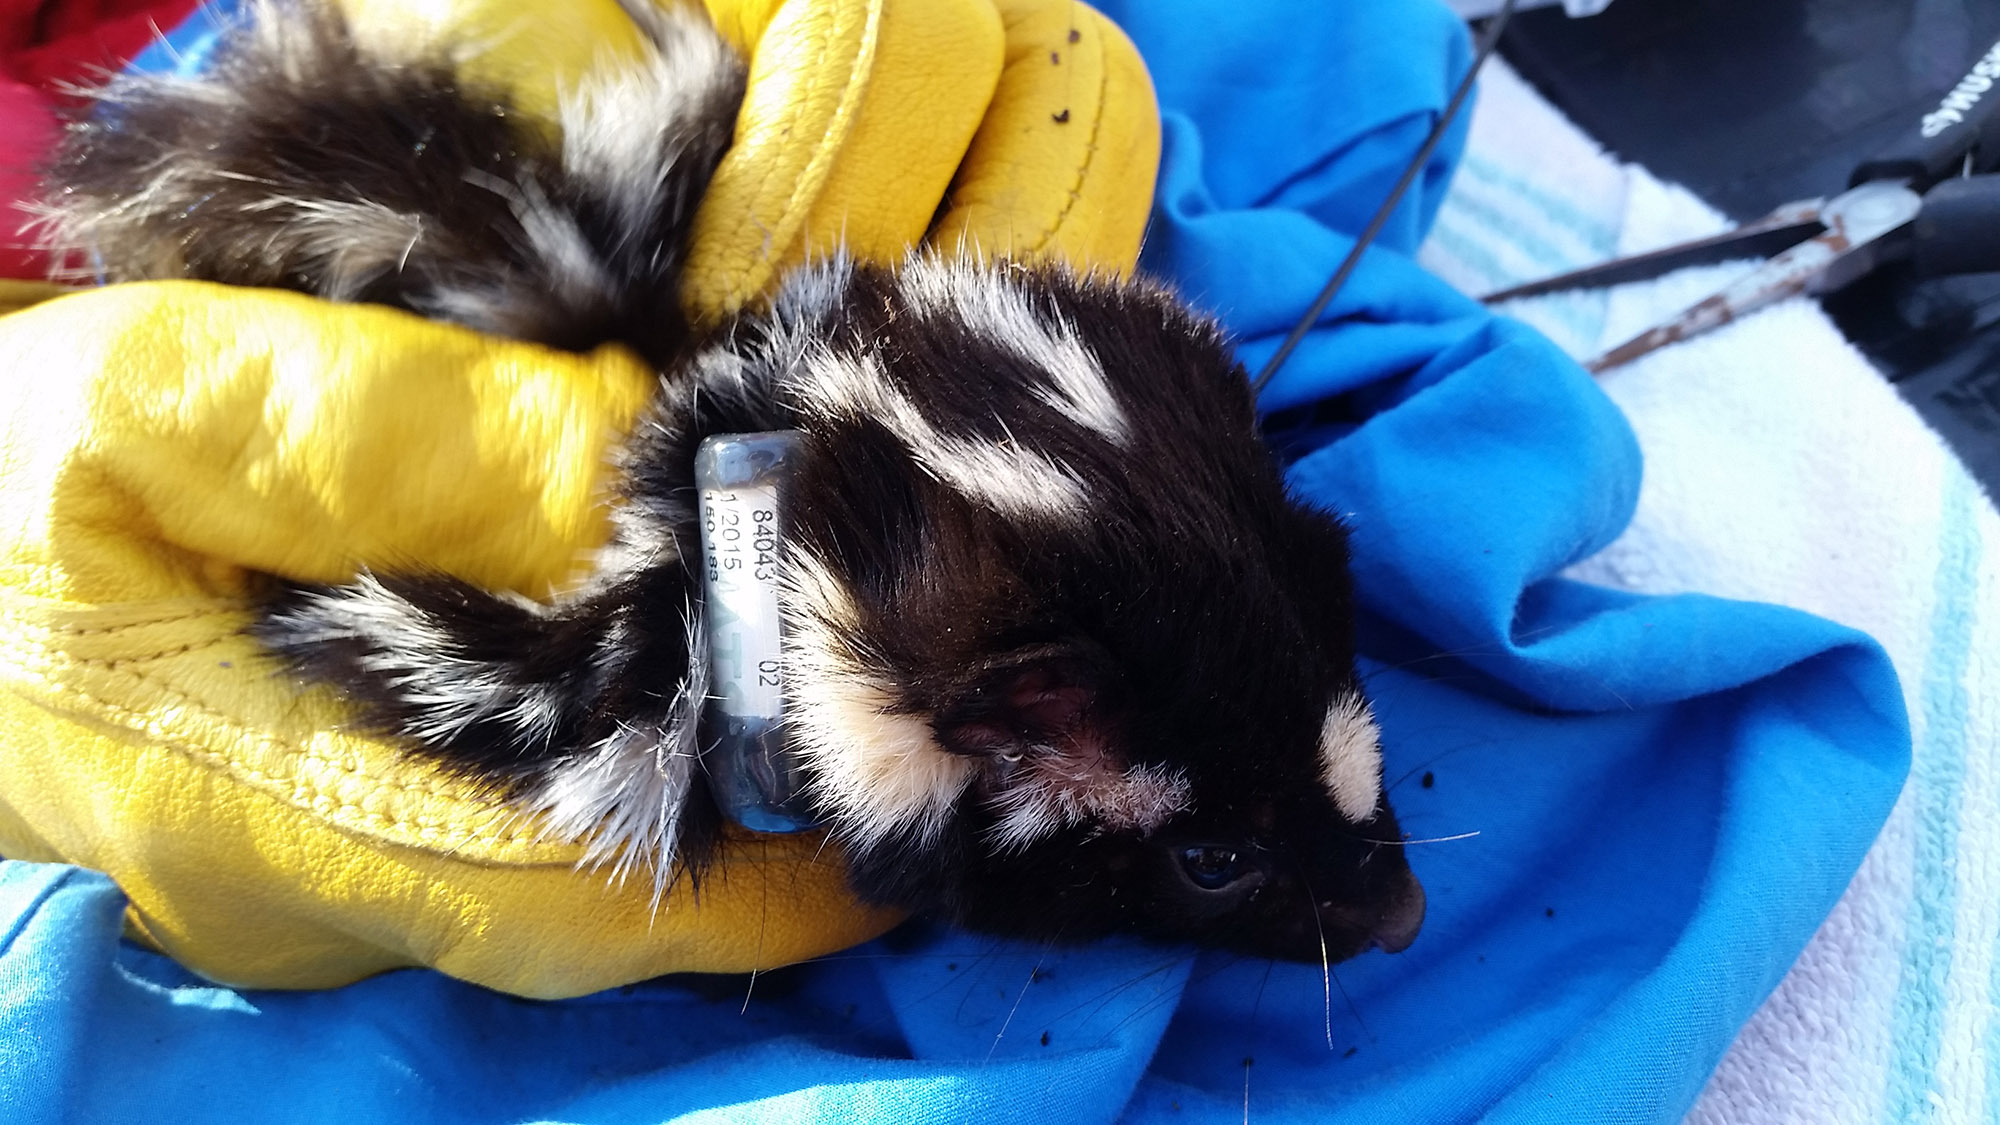 A photo of a spotted skunk being held in a towel with a tracking collar around its neck.